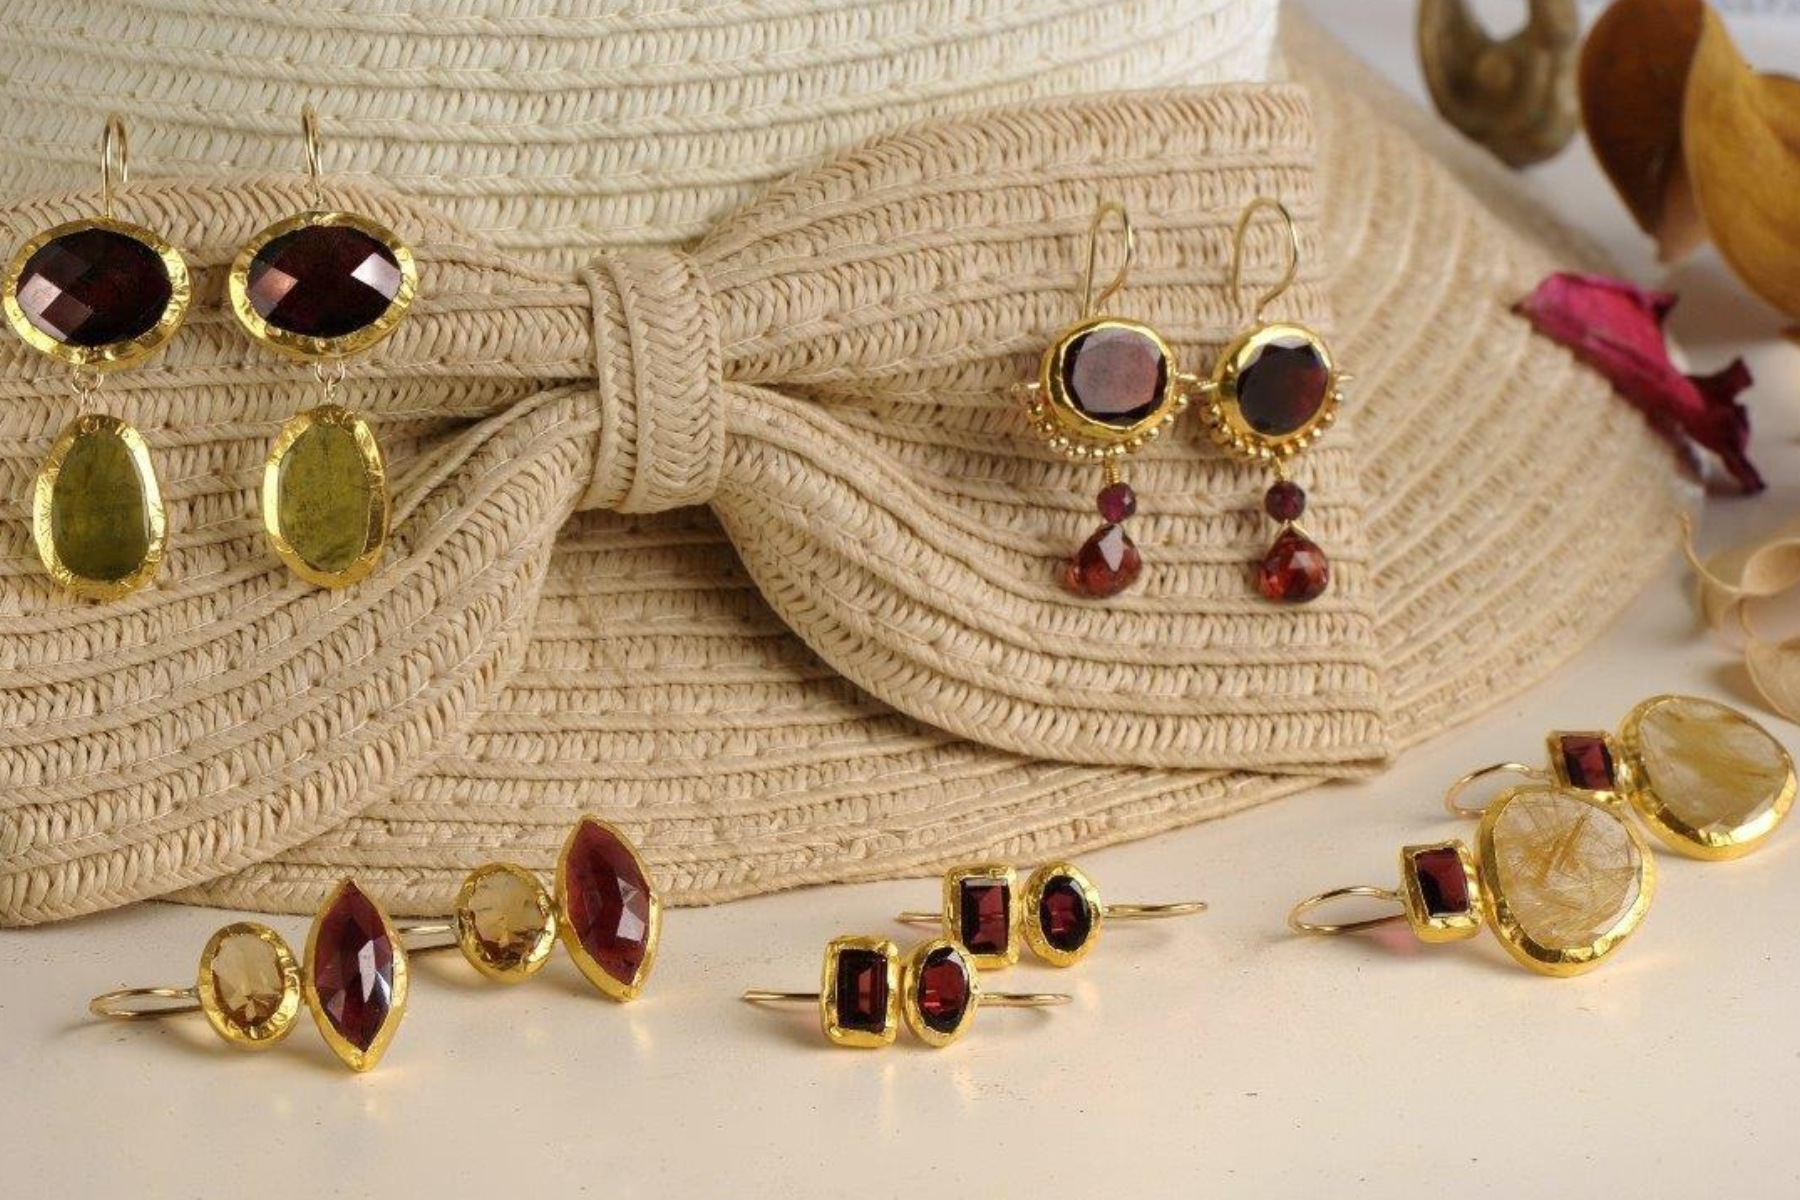 Birthstone Jewelry For Classic And Timeless Elegance - Discover Its Enduring Charm